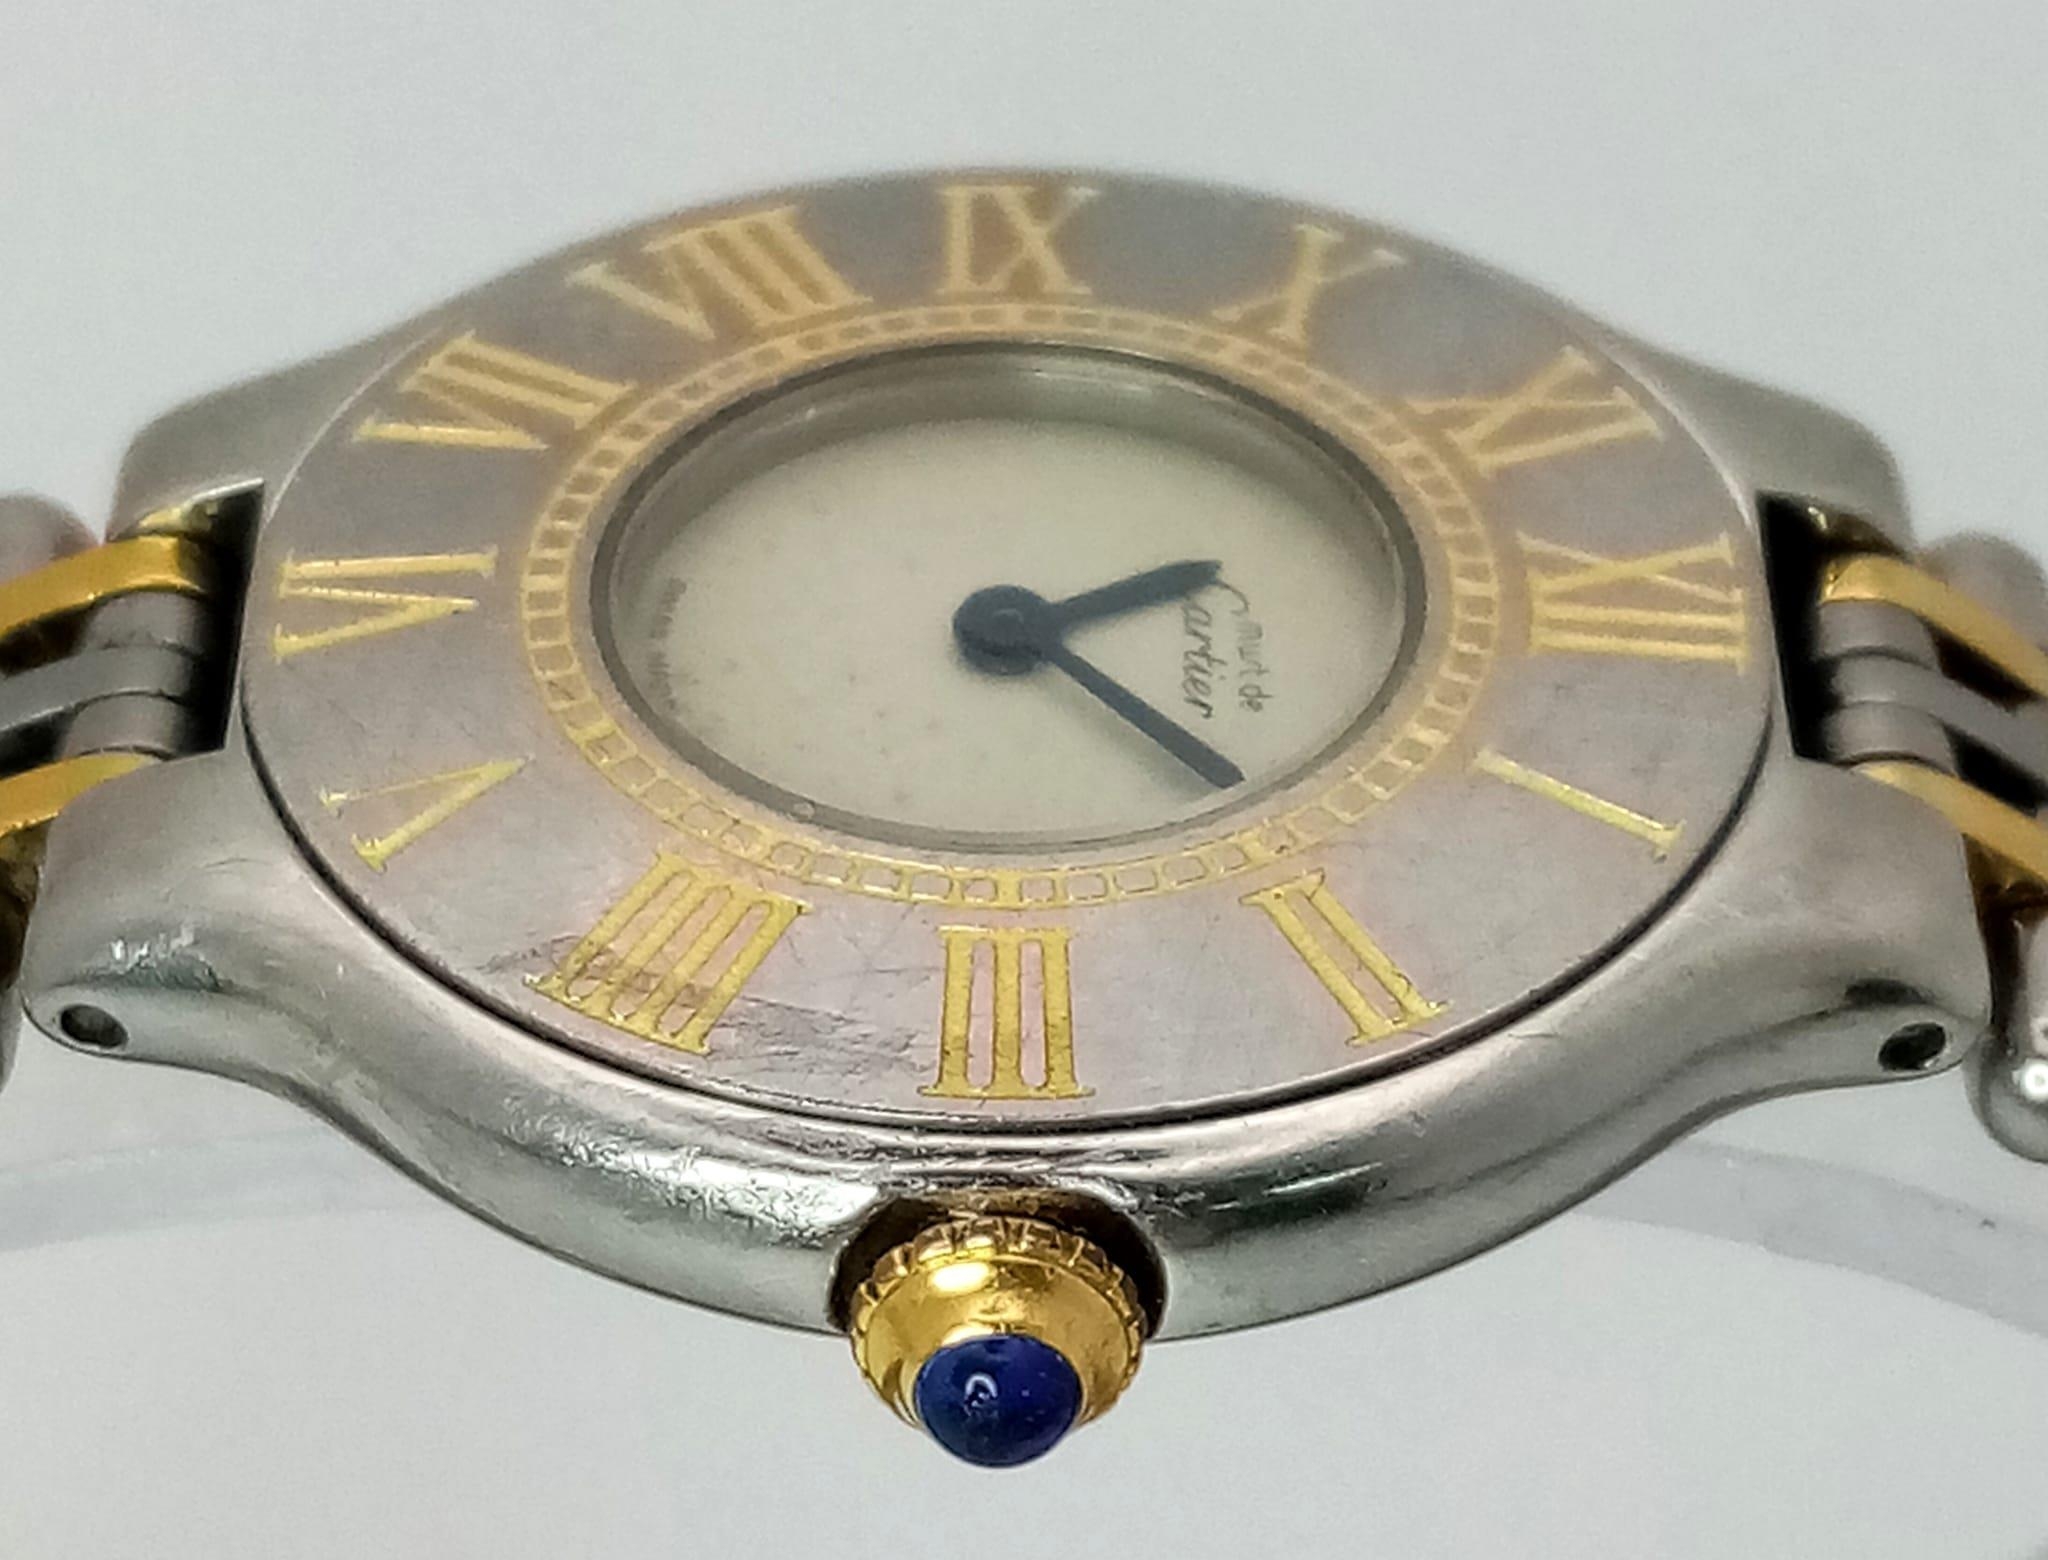 A LADIES MUST DE CARTIER 21 AN EARLY 1990'S MODEL THAT NEEDS THE BEZEL REPOLISHING 28mm a/f - Image 4 of 7